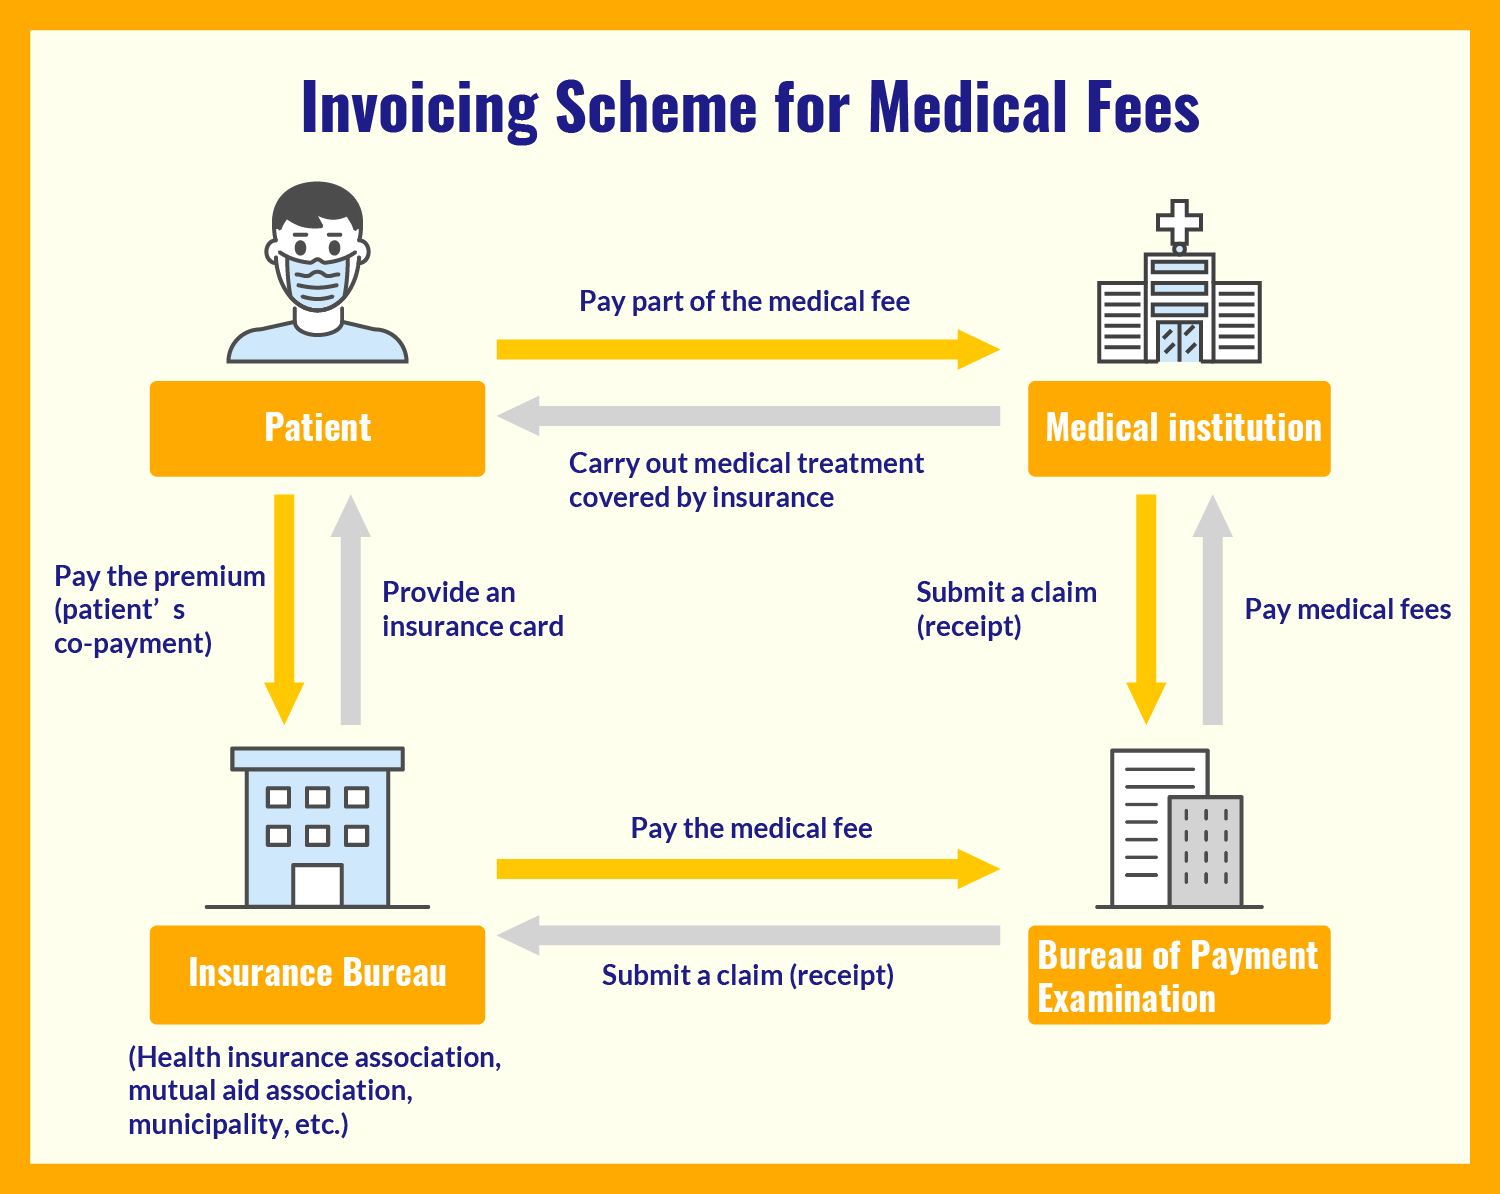 Invoicing Scheme for Medical Fees